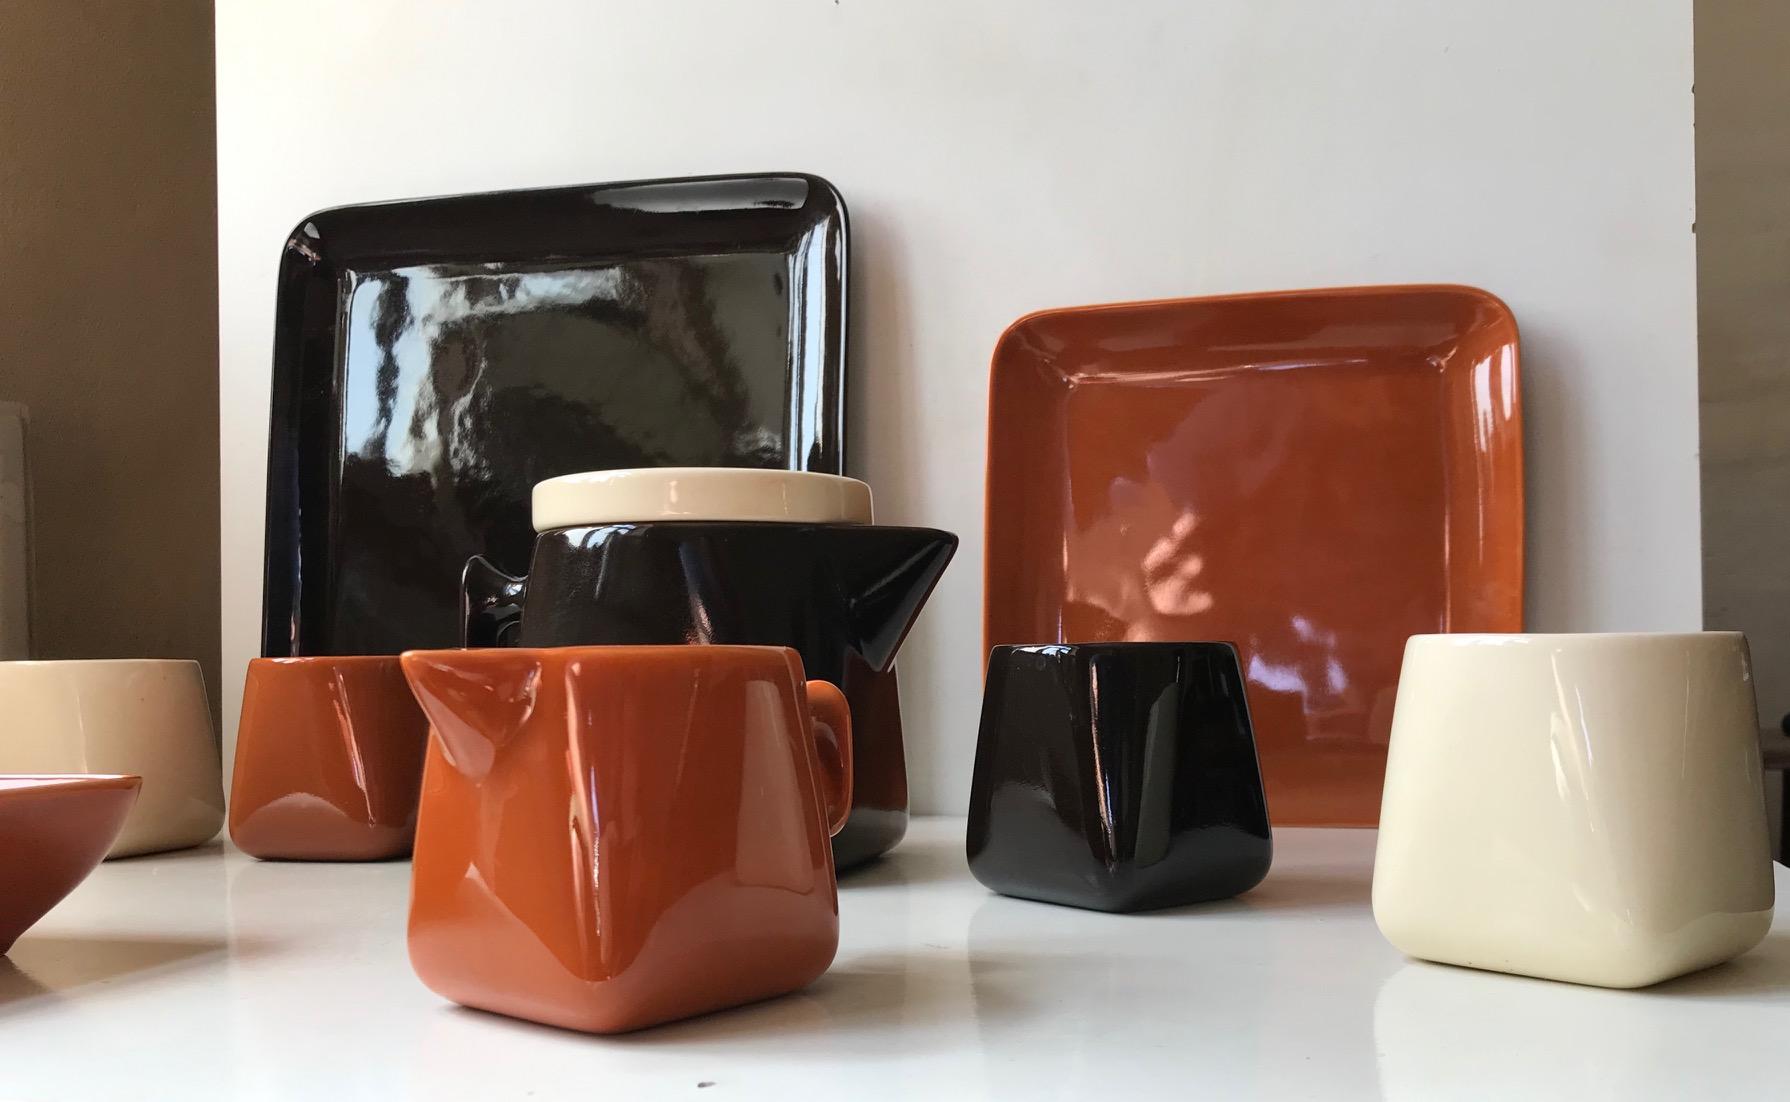 A rare Teaservice consisting of a teapot, creamer and sugar bowl, 2 cake serving dishes and 4 cups. The shape of the teapot, creamer and cups starts of as a square at the bottom and transform fluently into a circle at the top. All pieces features